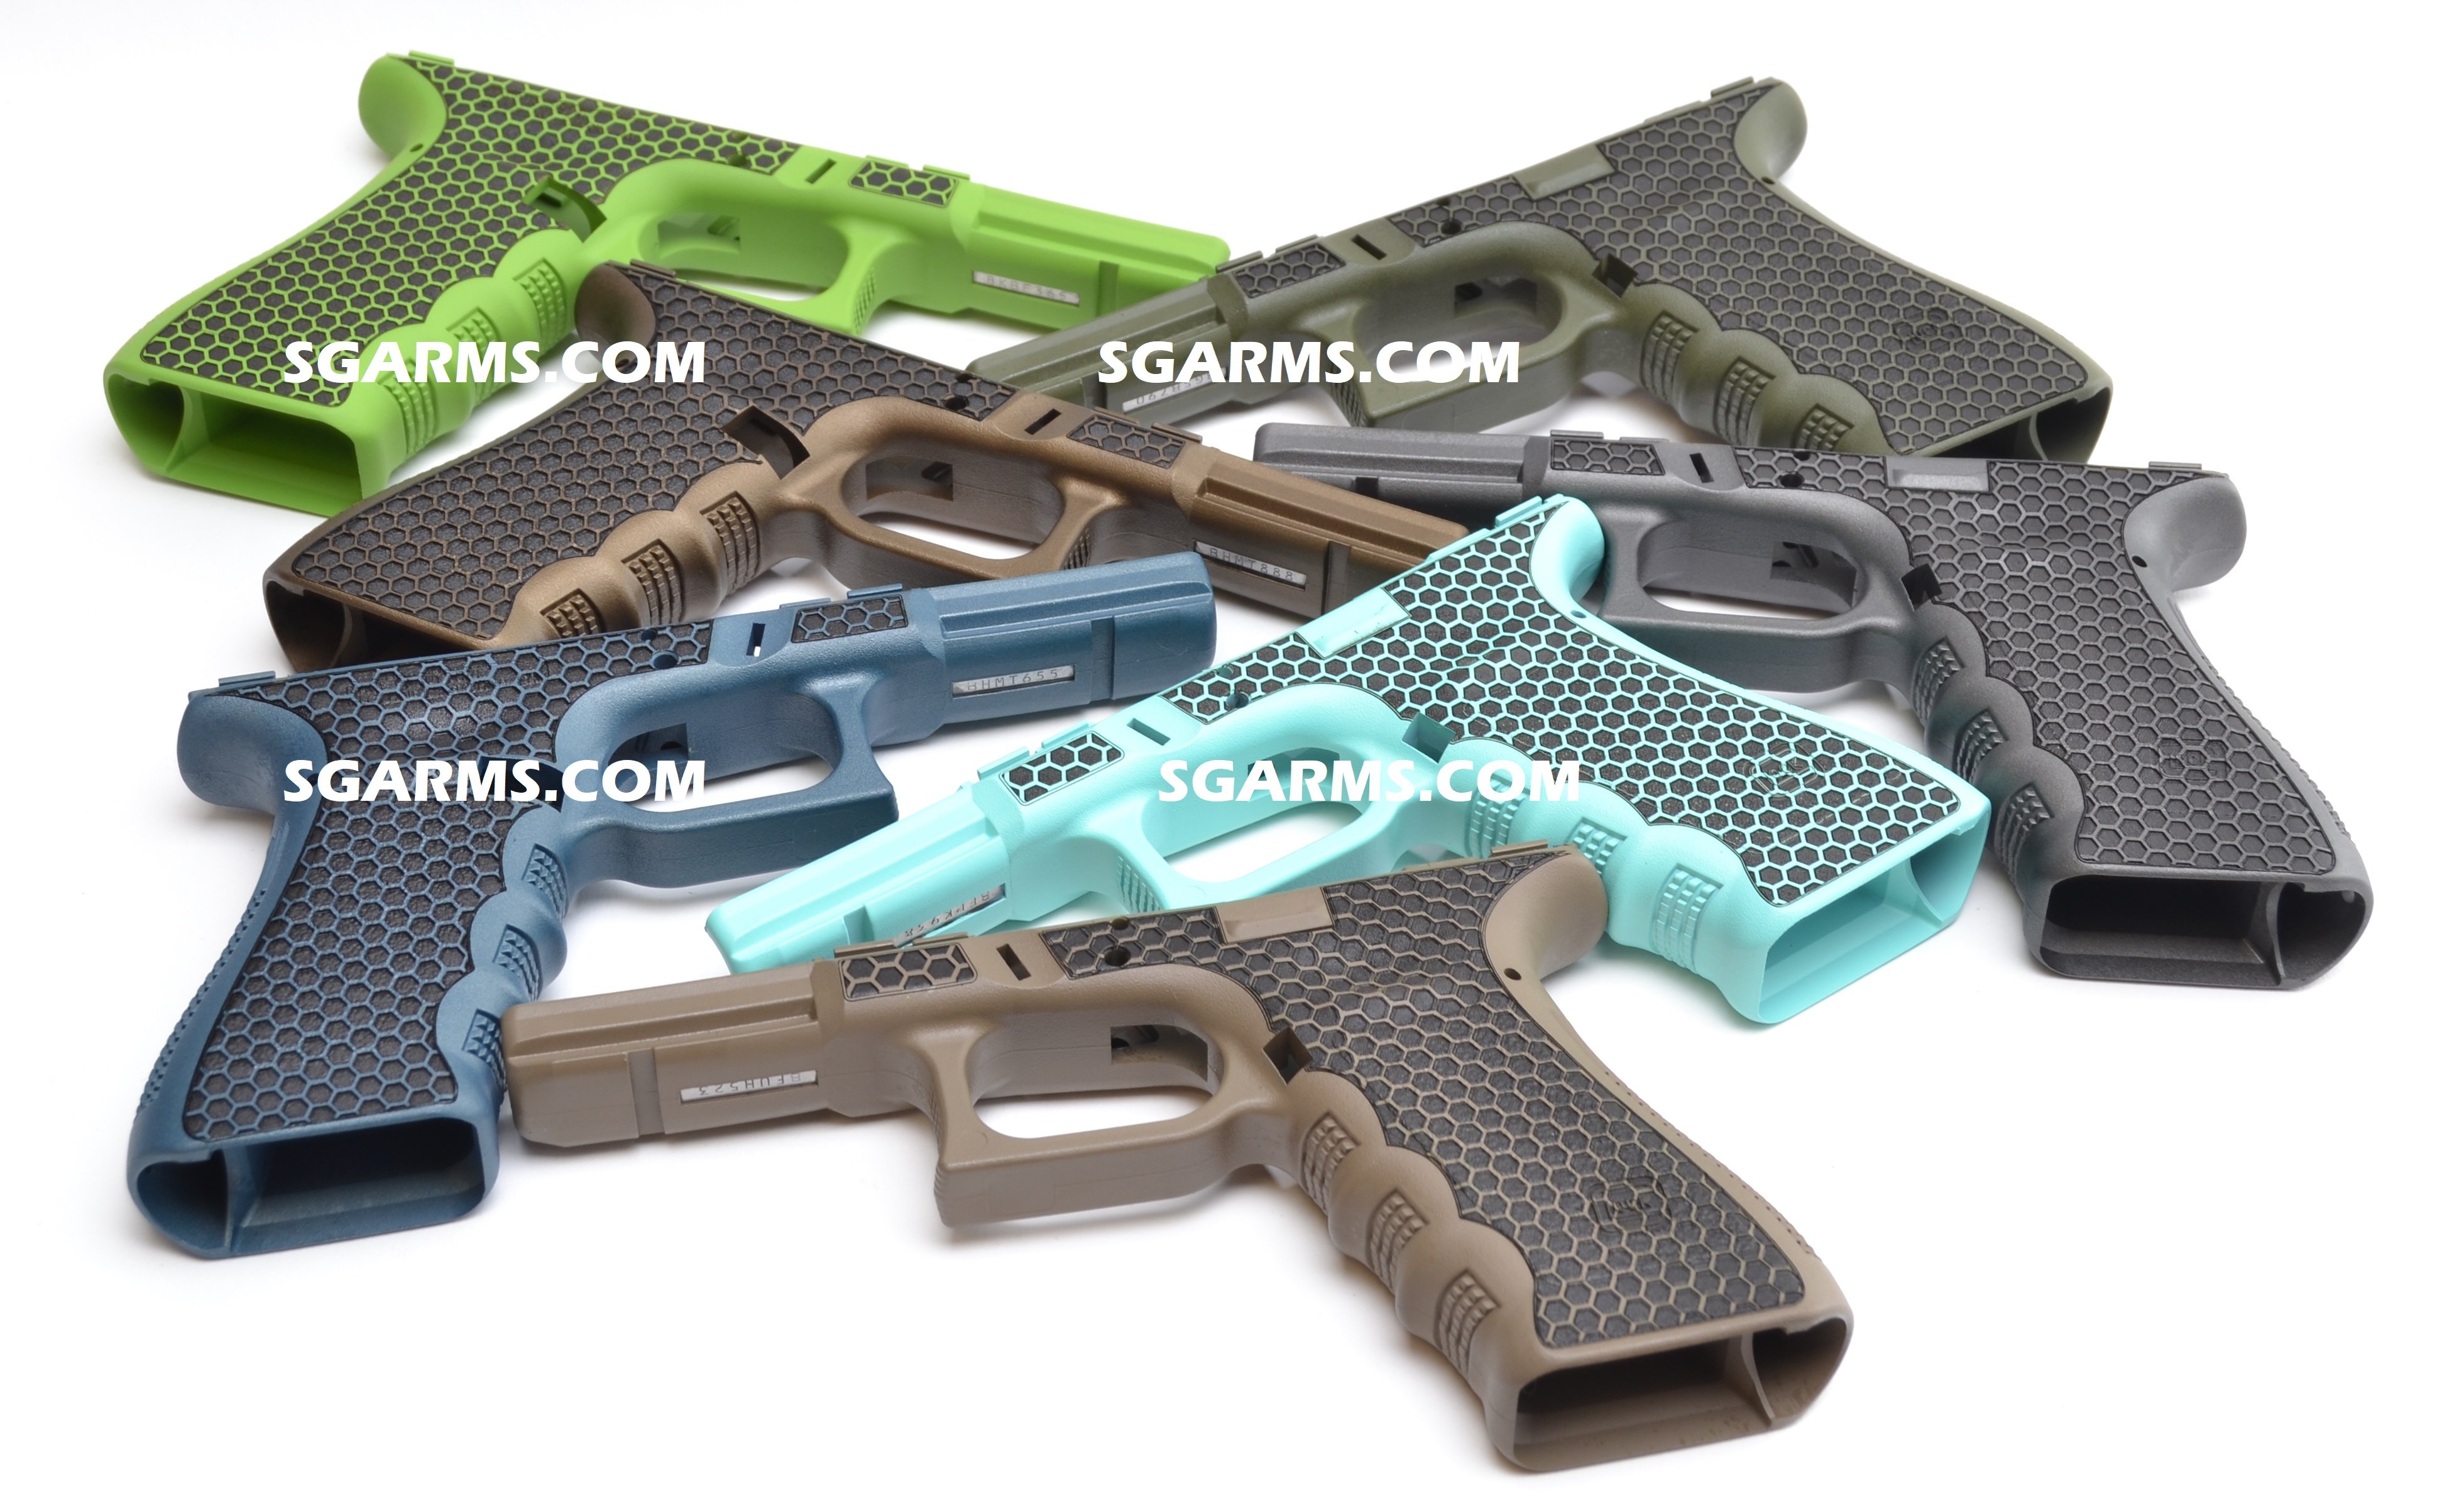 More Glock Frames in Stock and ON SALE- ALL ORDERS FREE SHIP on $50 or more! - $110